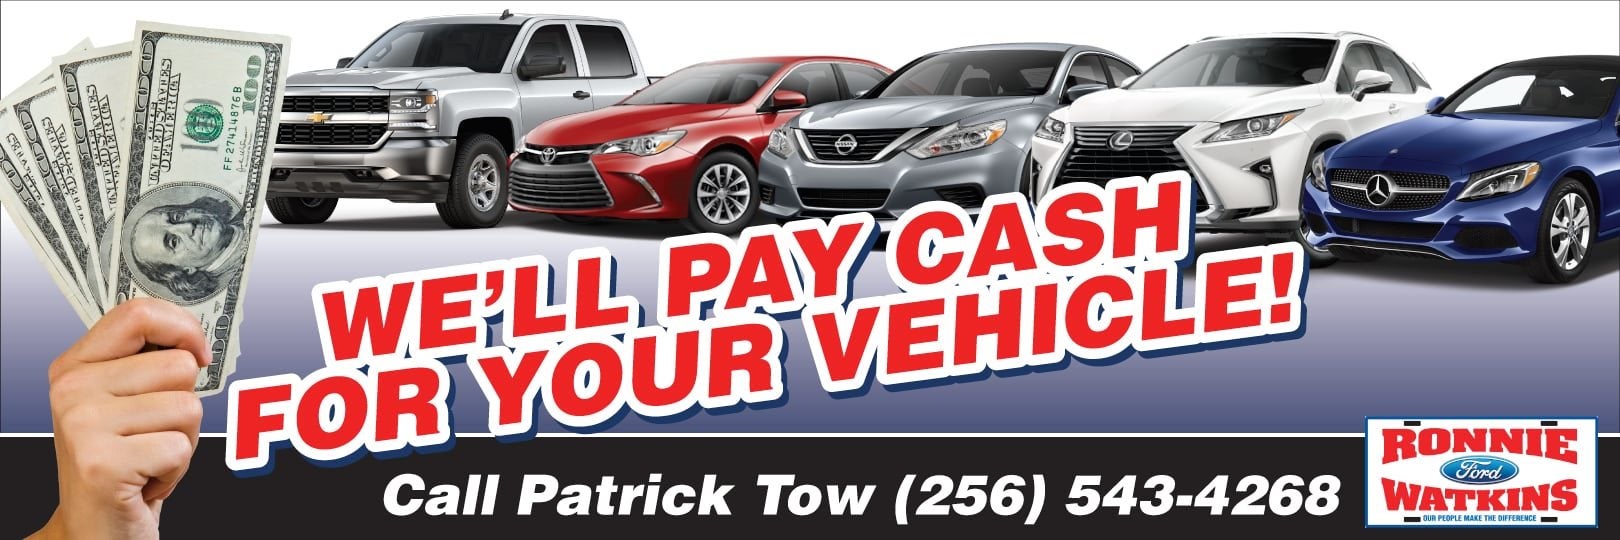 We'll Pay Cash For Your Vehicle